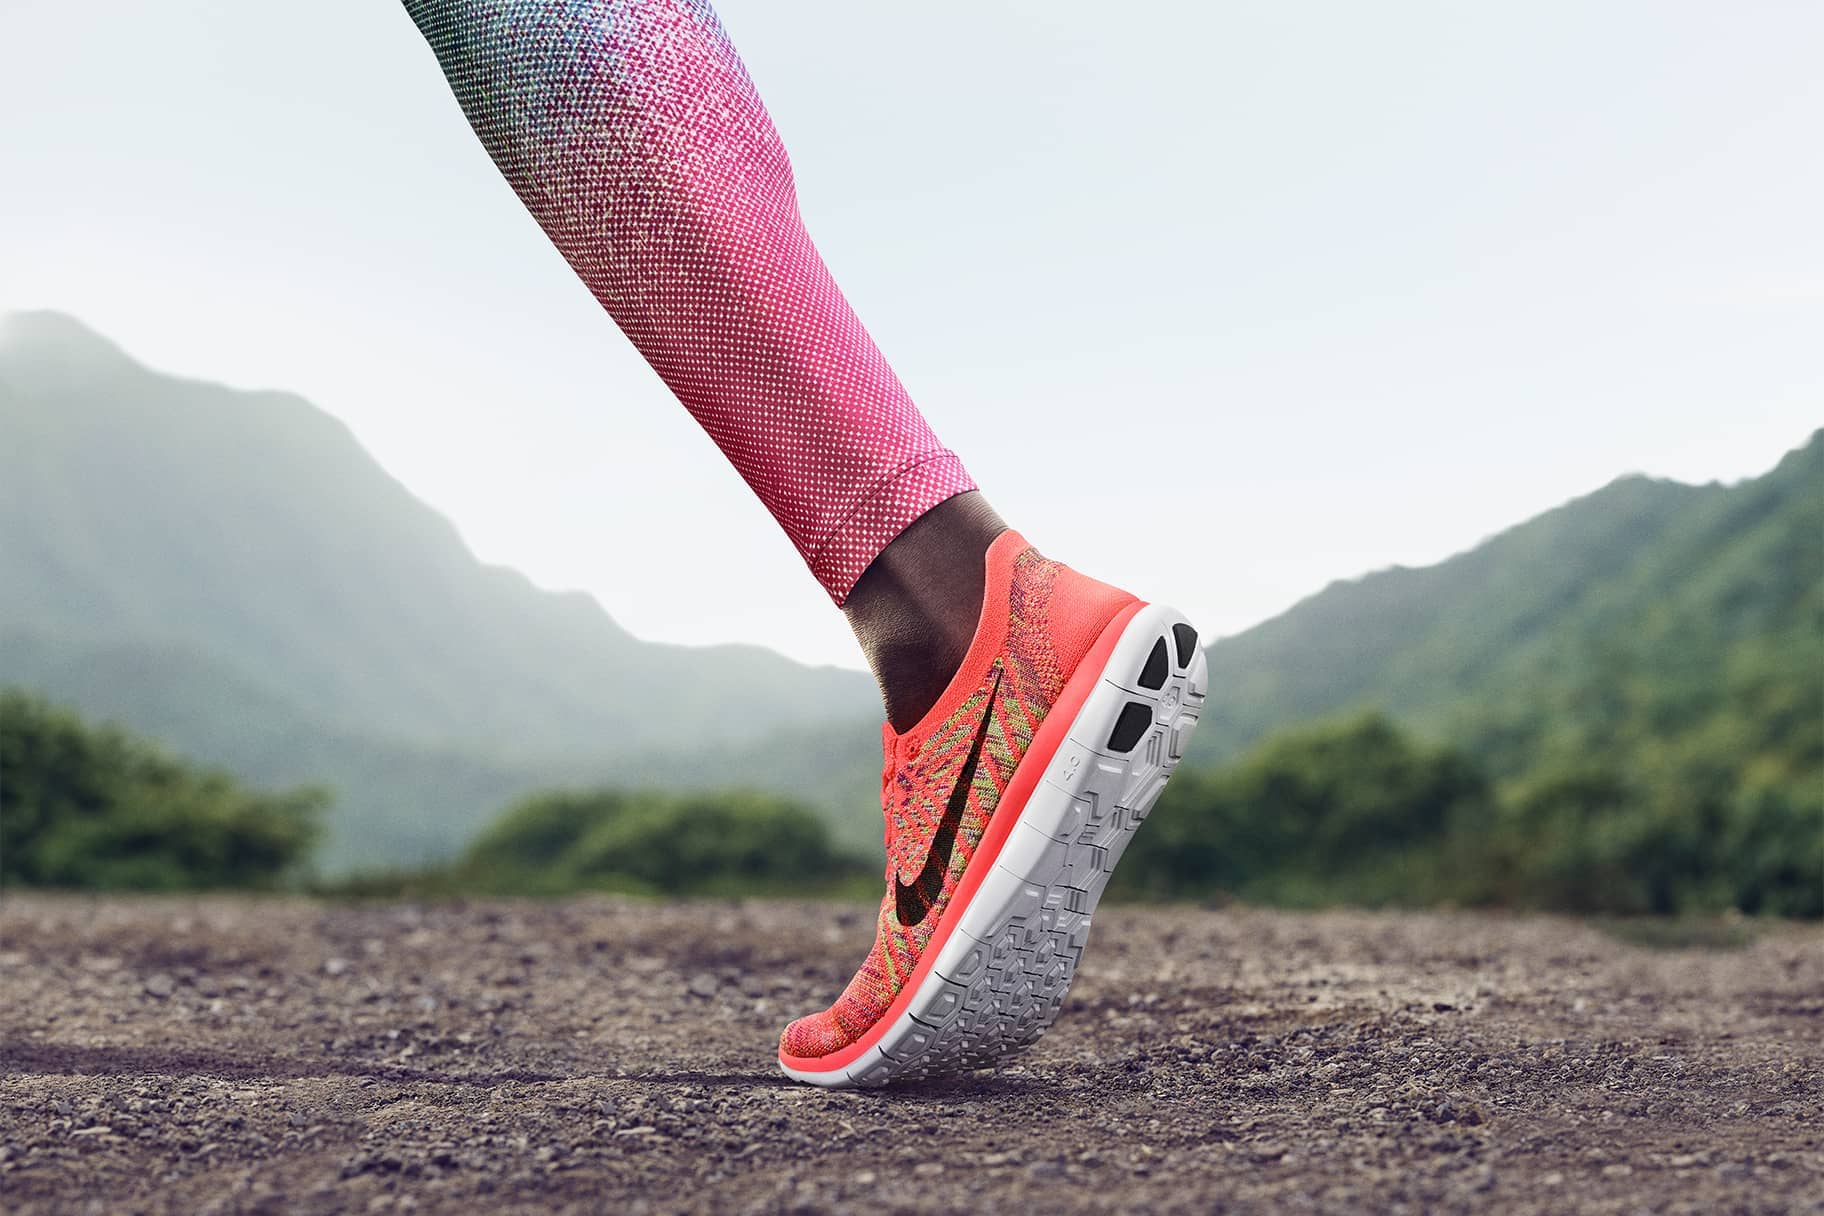 Tips for Buying Minimalist Barefoot Running Shoes. Nike HR